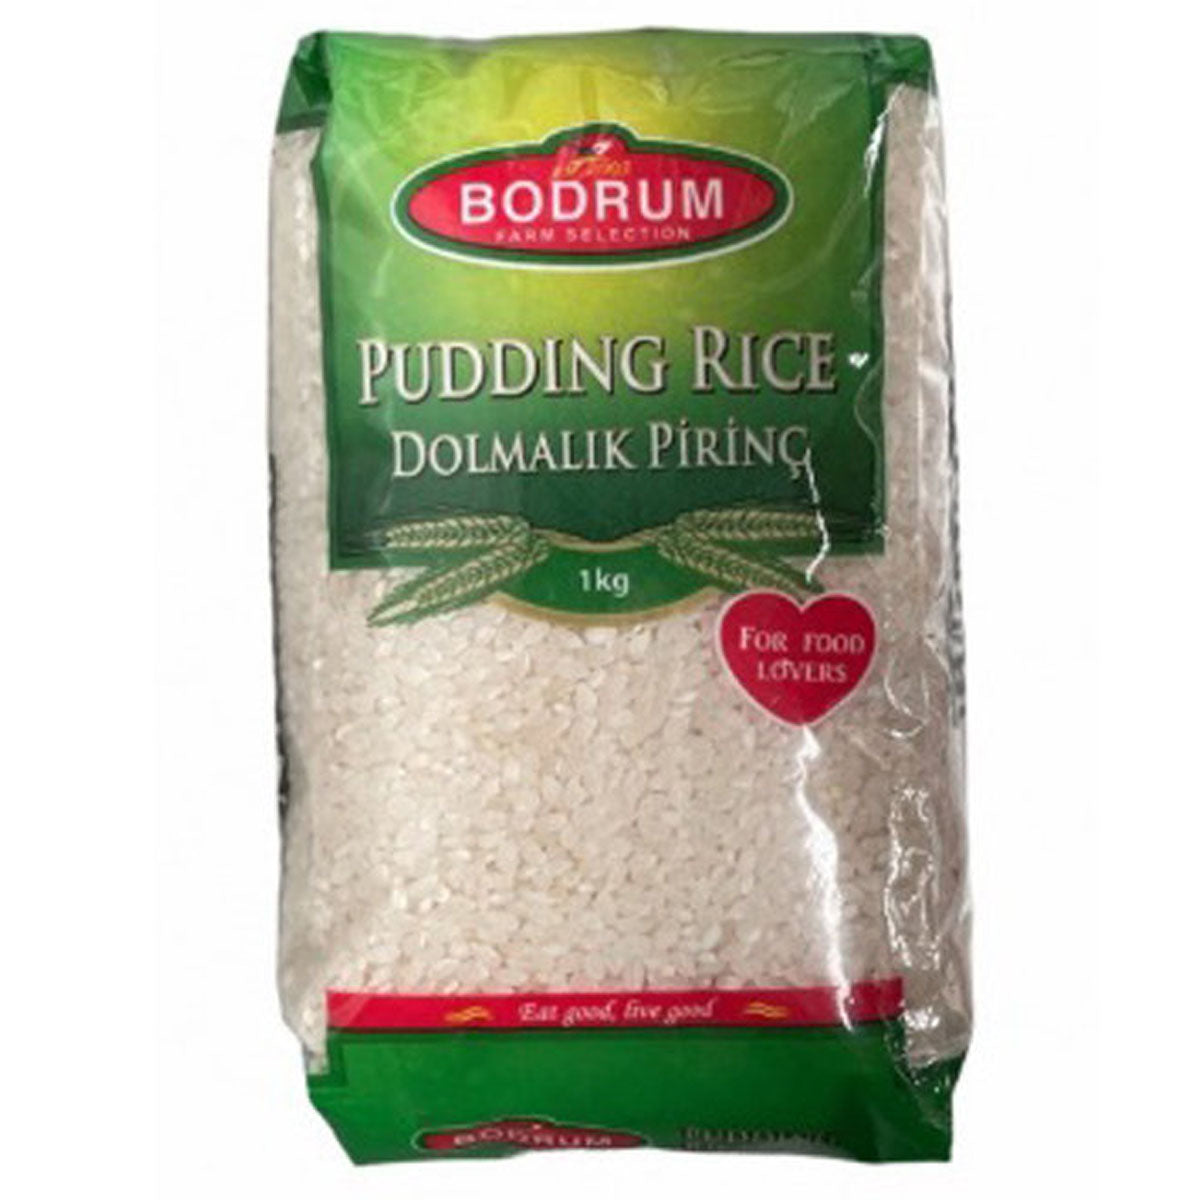 Bodrum - Pudding Rice - 1kg - Continental Food Store